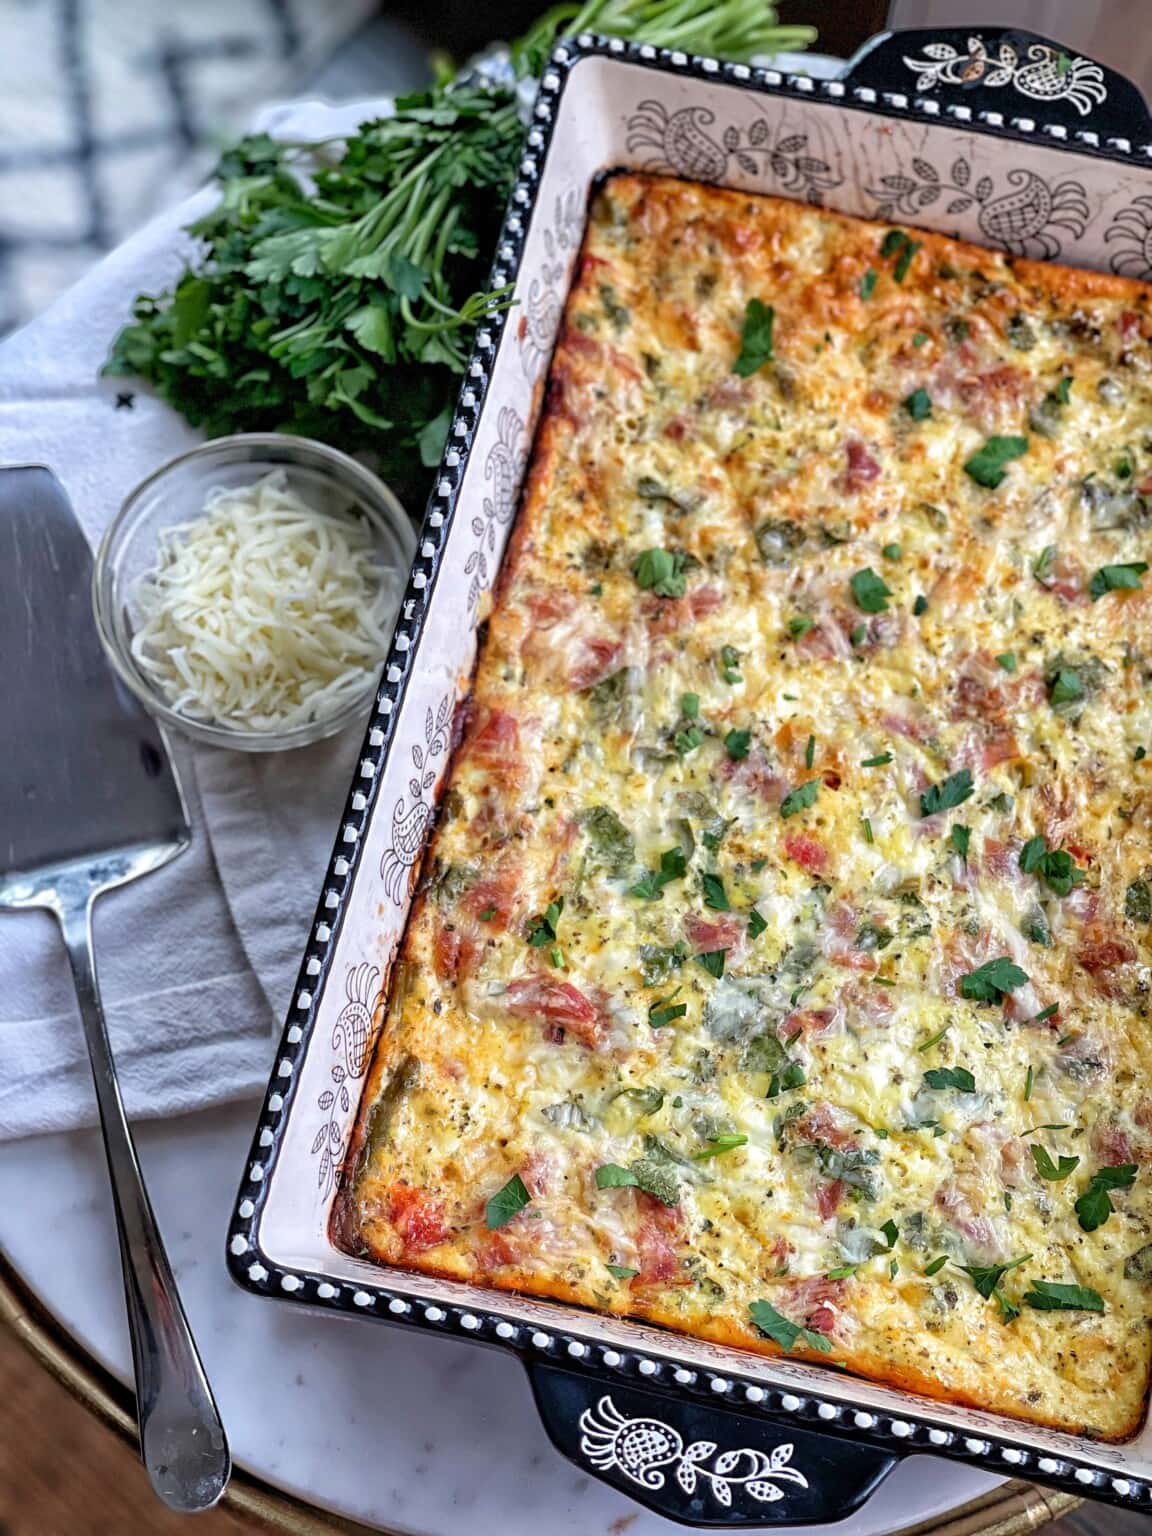 Italian Egg Bake with Prosciutto and Vegetables